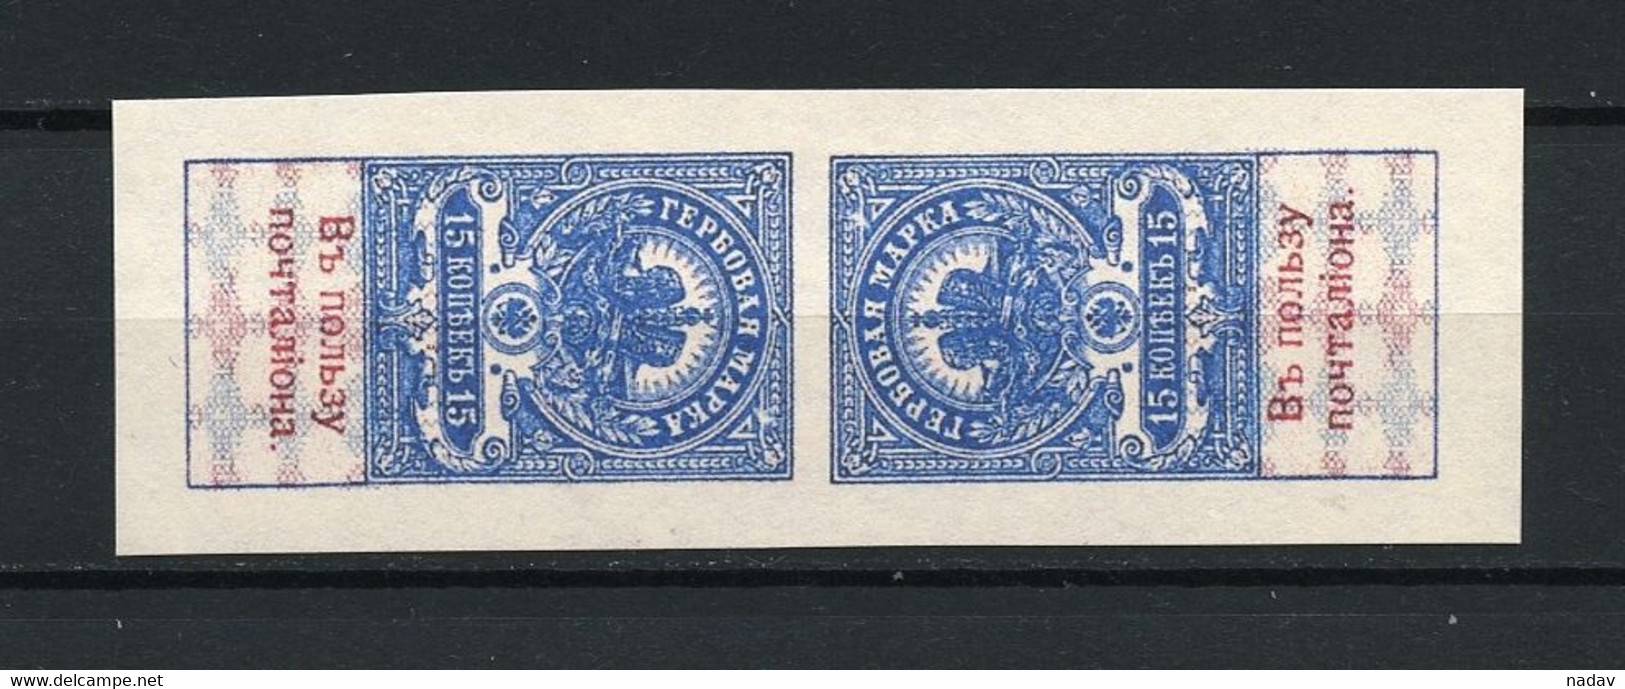 Russia -1909- Imperforate, Tete-beche, Reproduction - MNH** - Prove & Ristampe